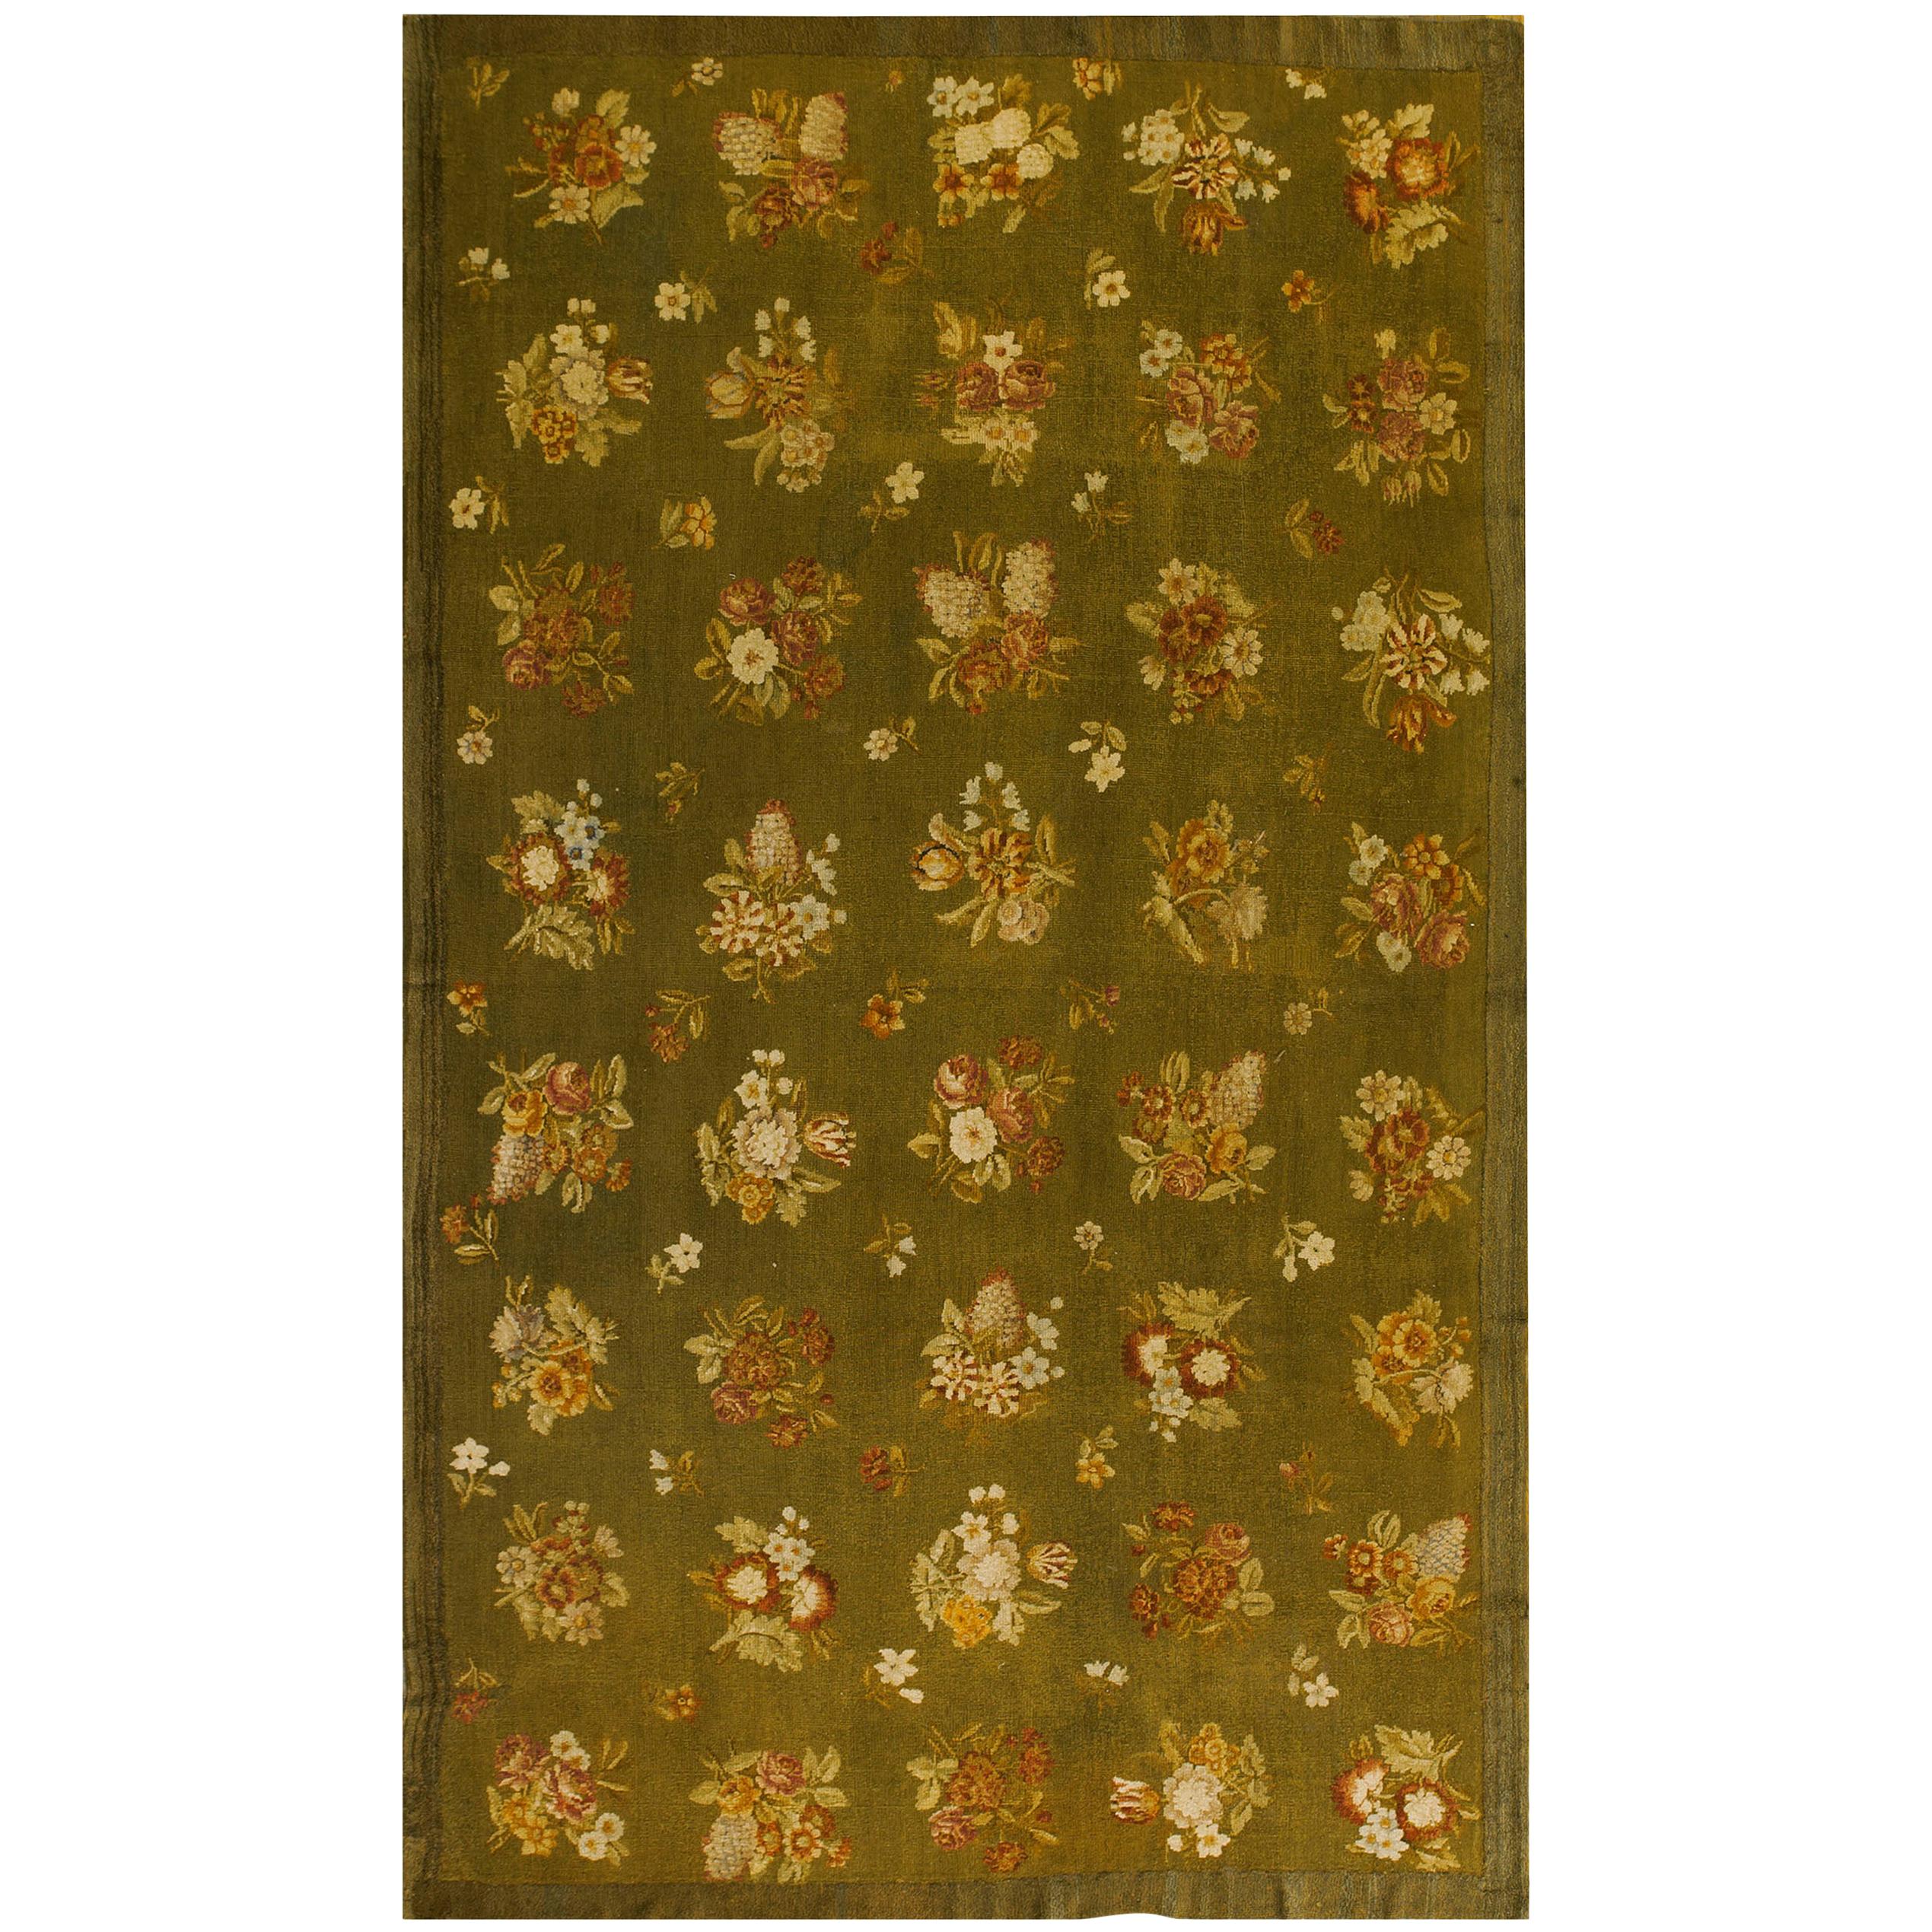 Early 19th Century French Empire Period Savonnerie Carpet ( 8'x13'6" - 243x412 )